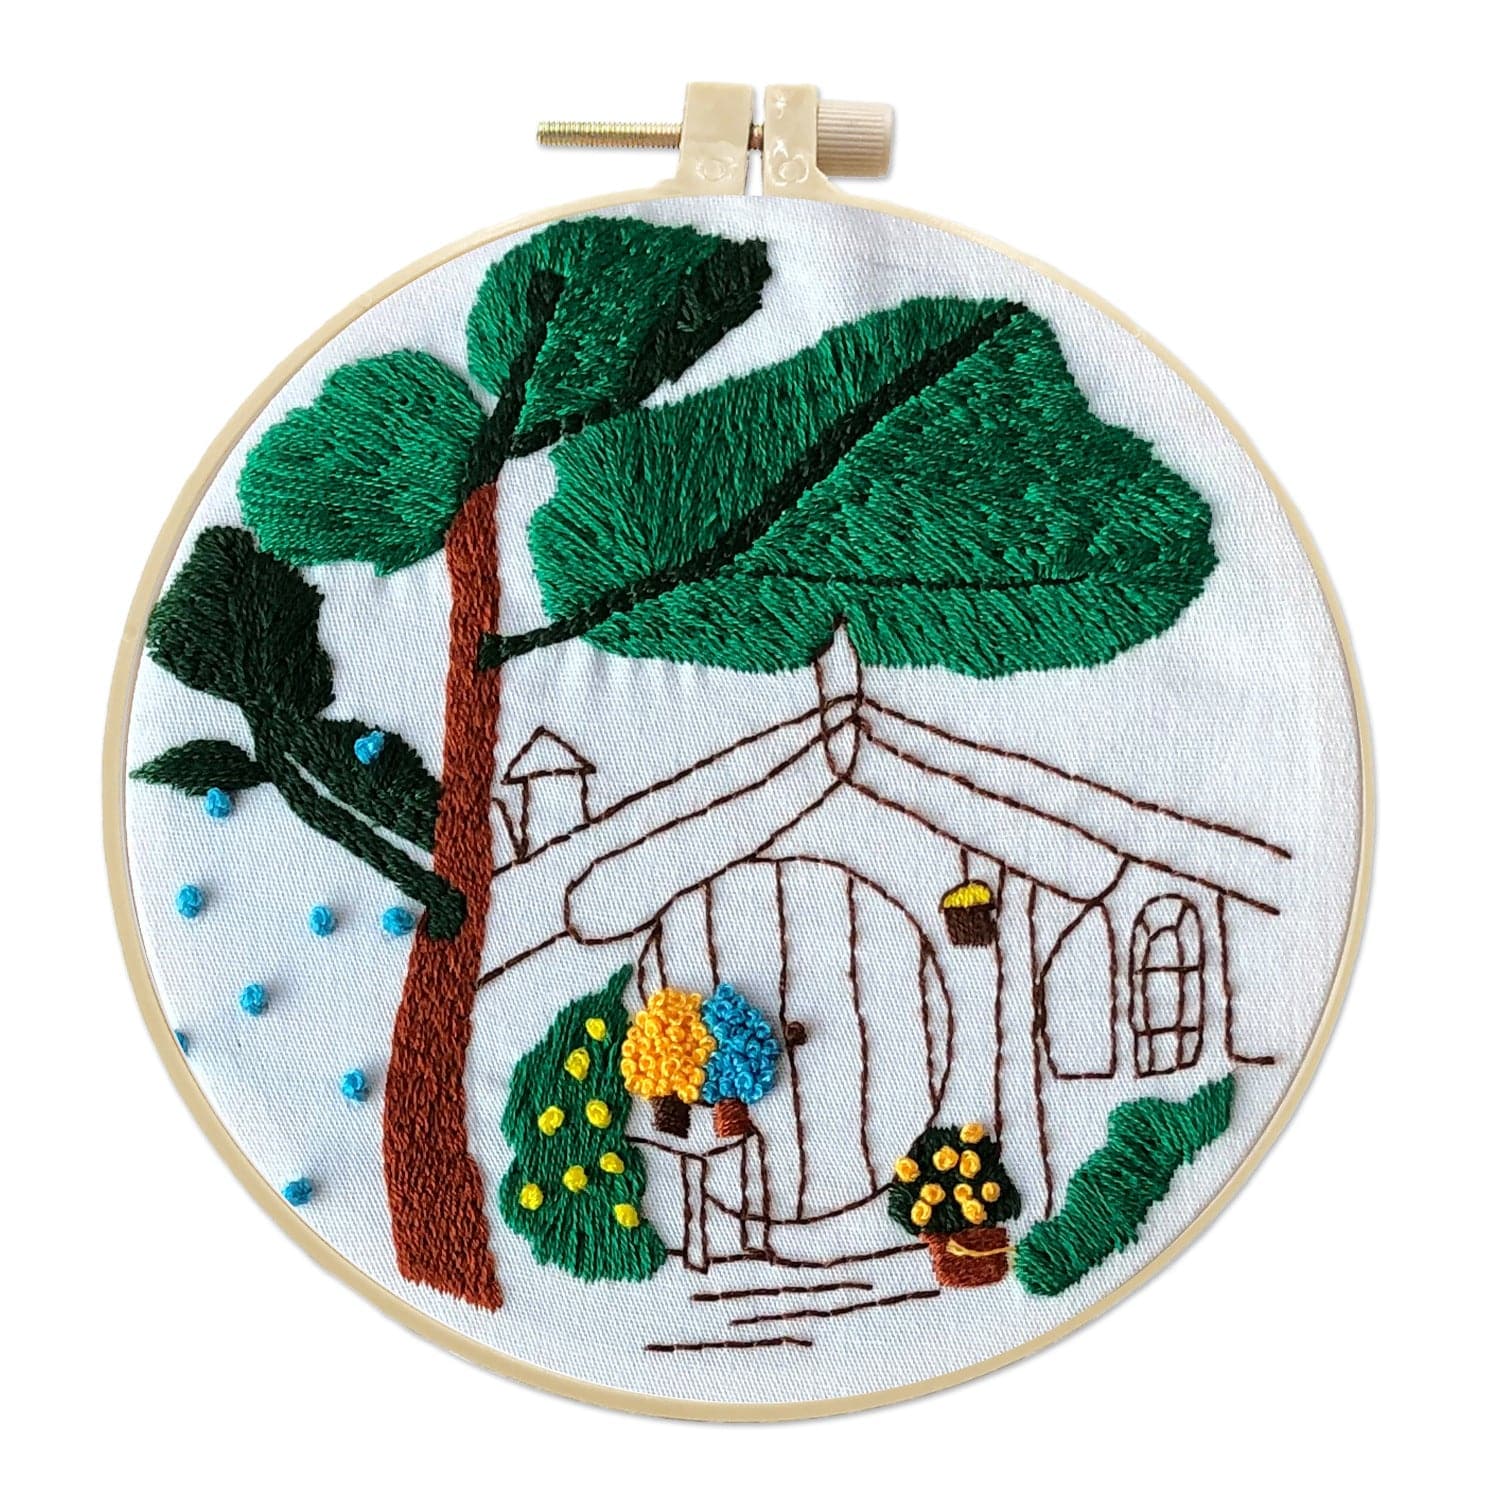 "The Flower on the Corner" - Embroidery ktclubs.com